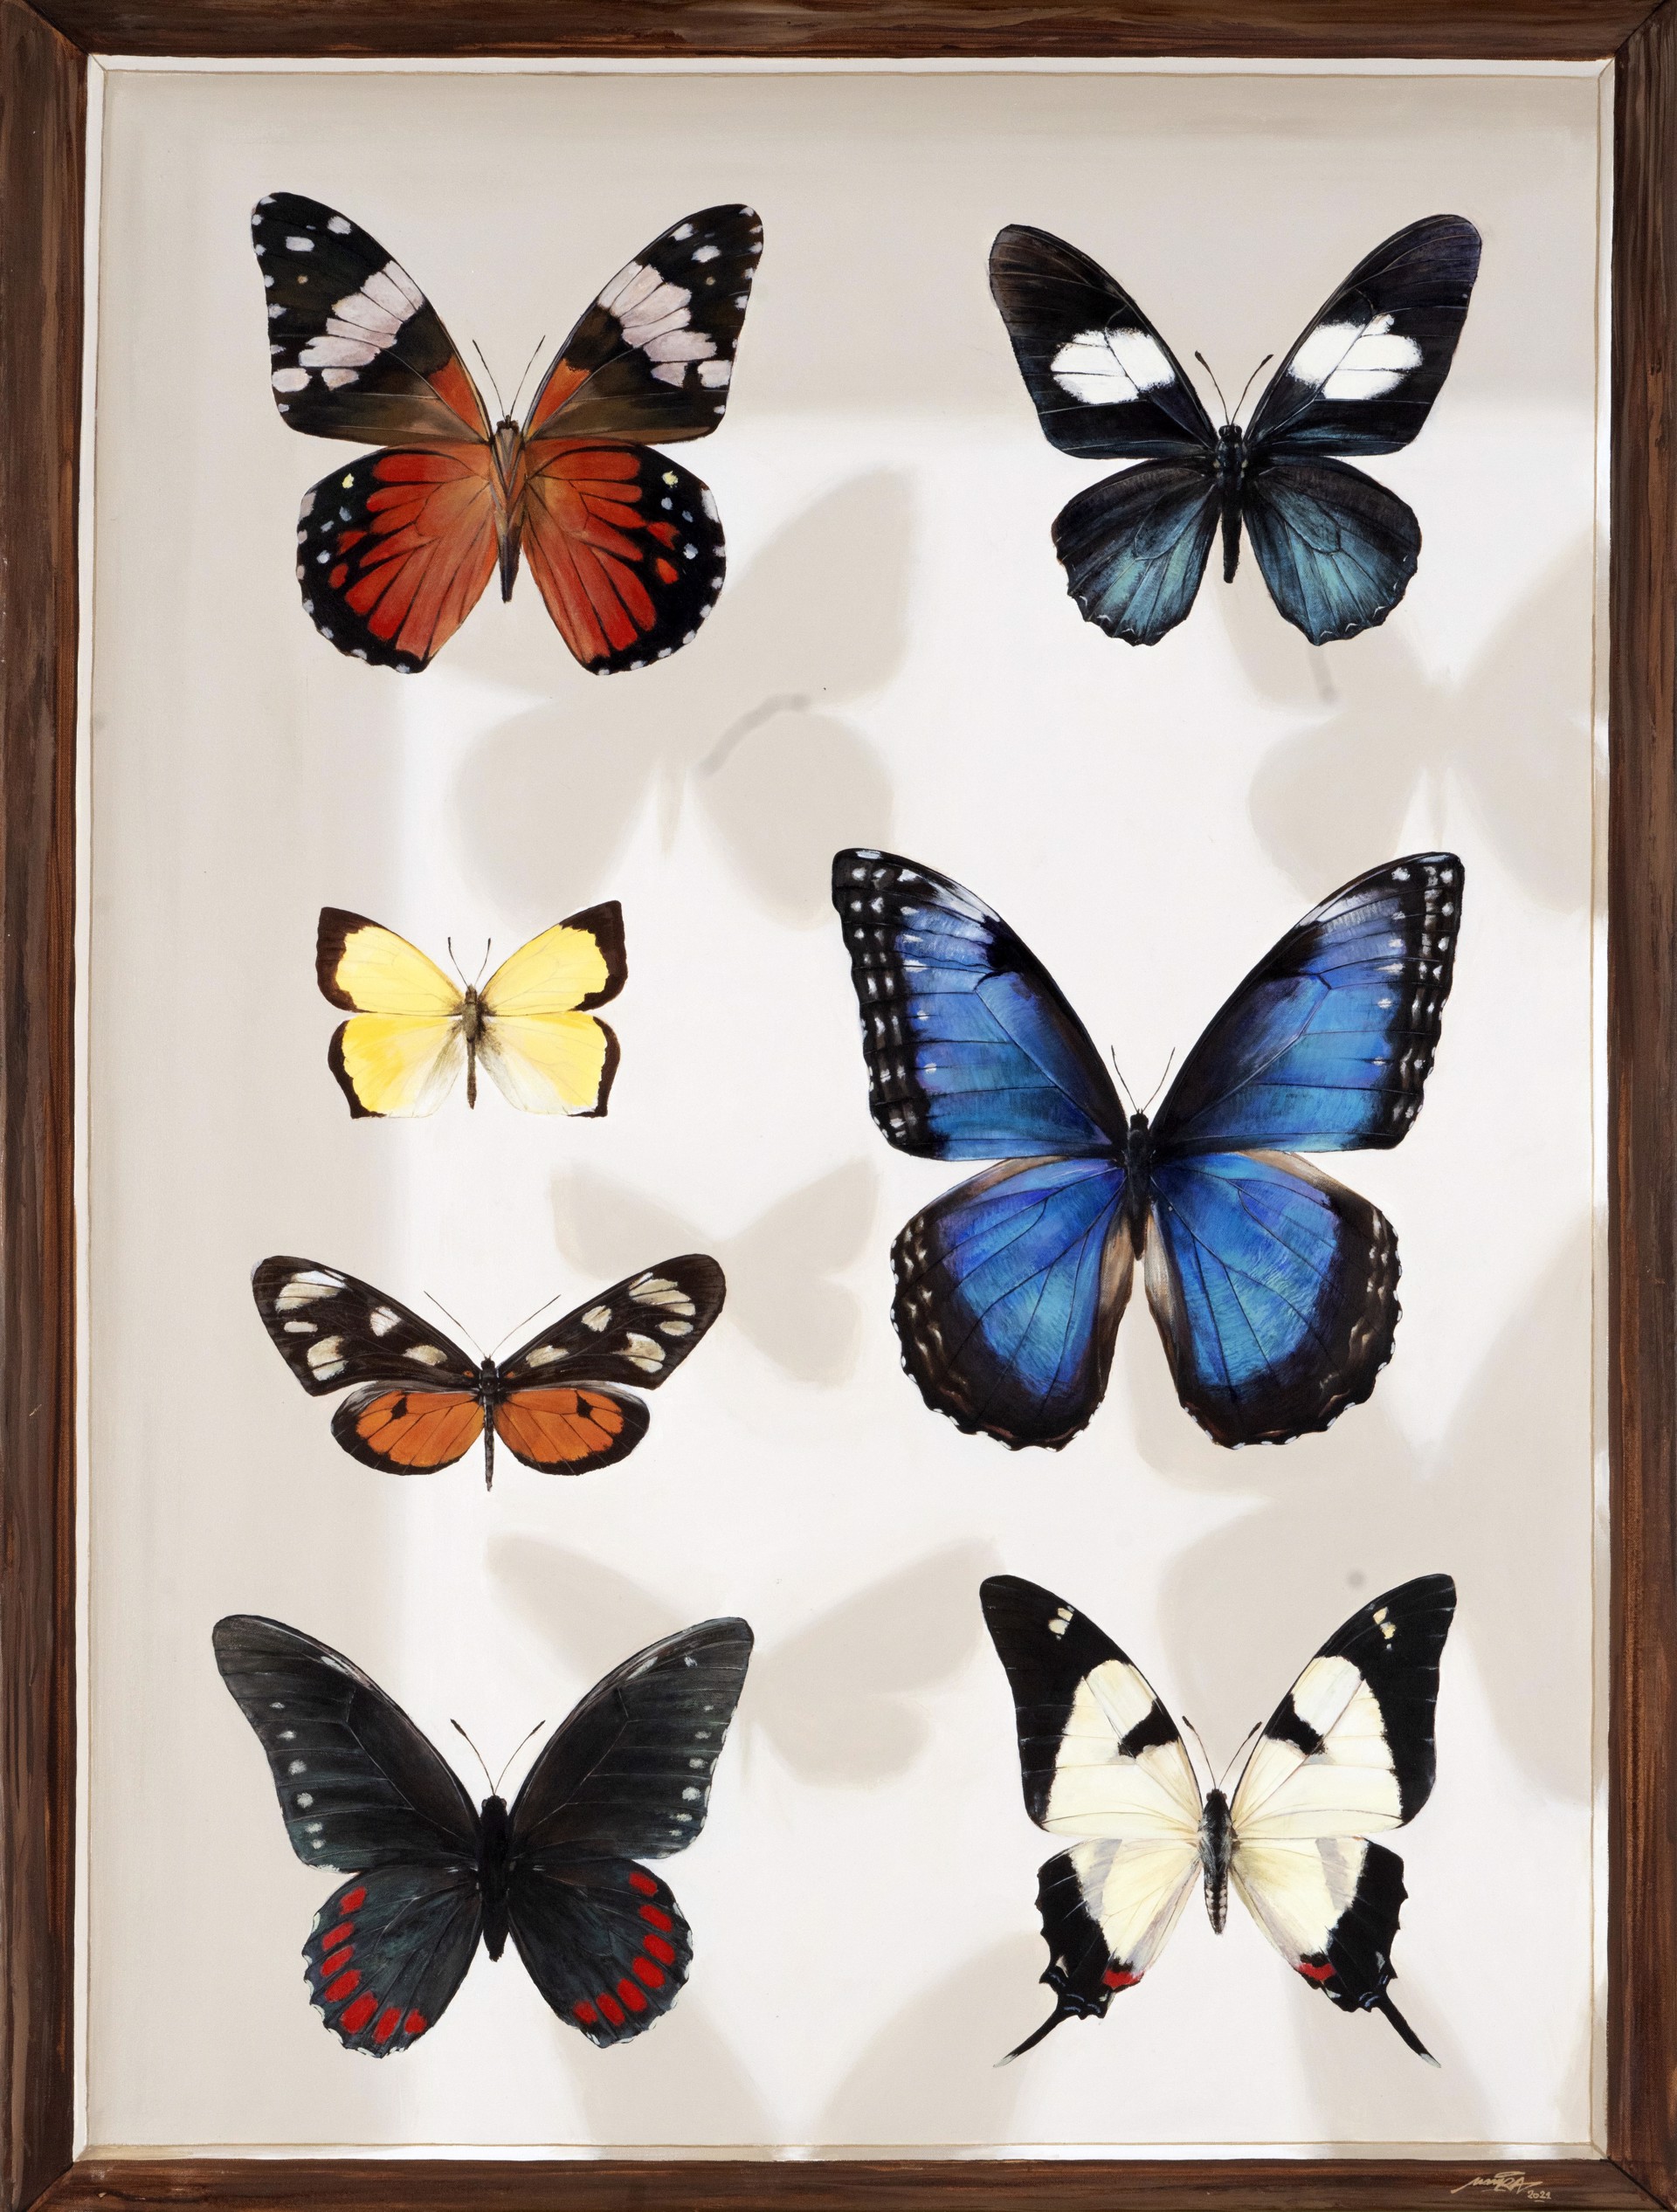 Butterflies of Mexico - Board 1 by Mantra